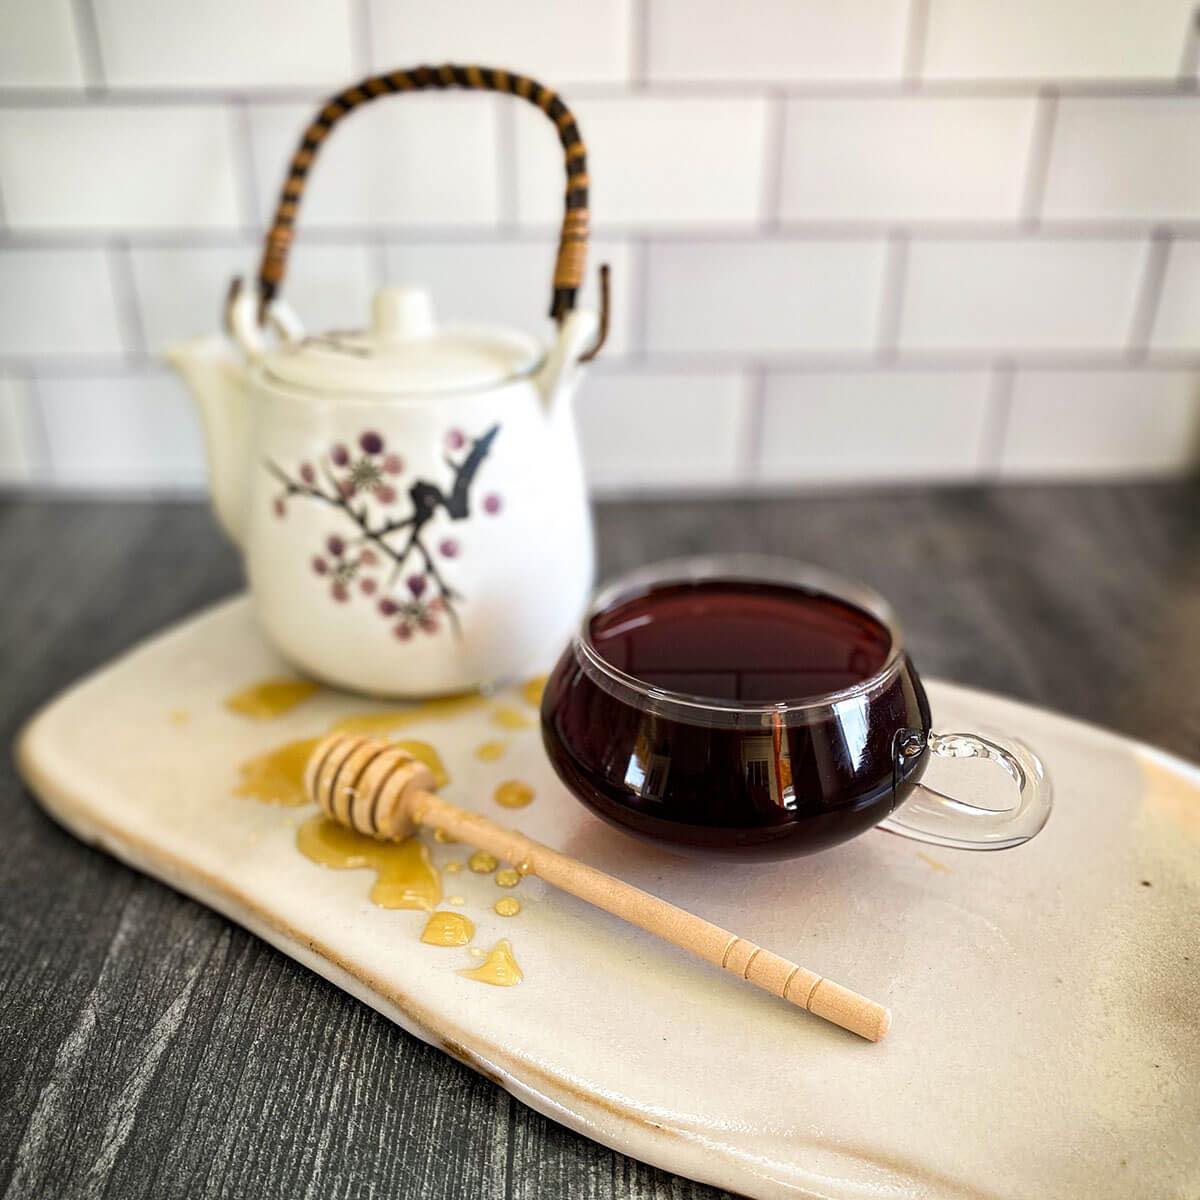 A brewed mug of red rooibos tea is in the foreground with a honey wand dripping with honey and a white tea pot.